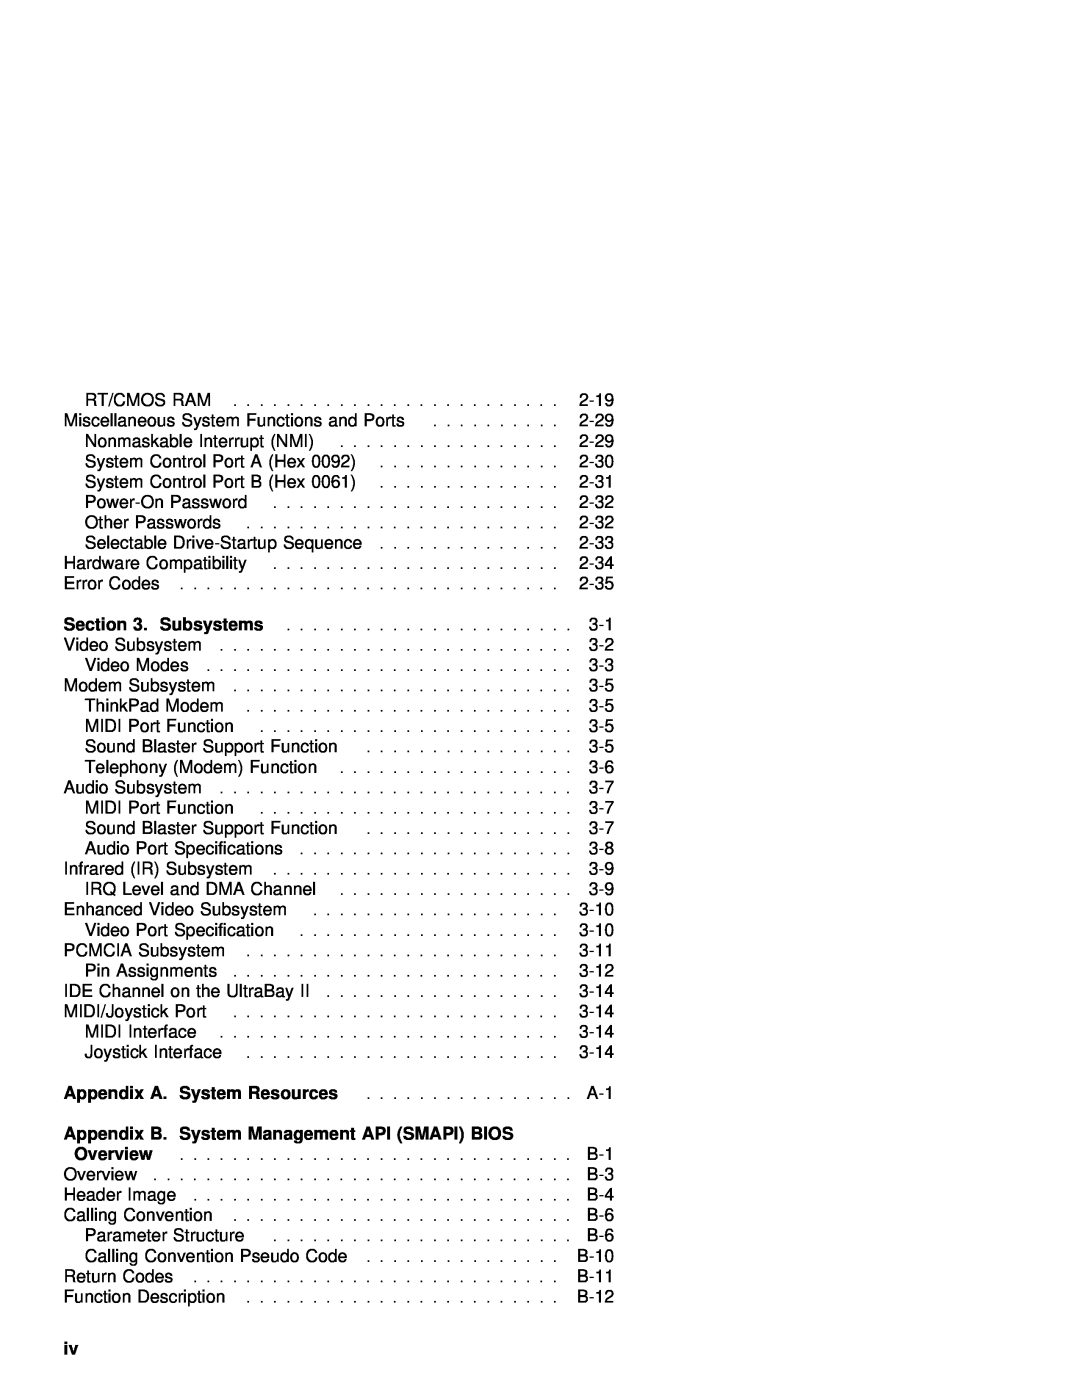 IBM 770 manual Subsystems, Appendix A, System Resources, Appendix B. System Management API SMAPI, Overview 